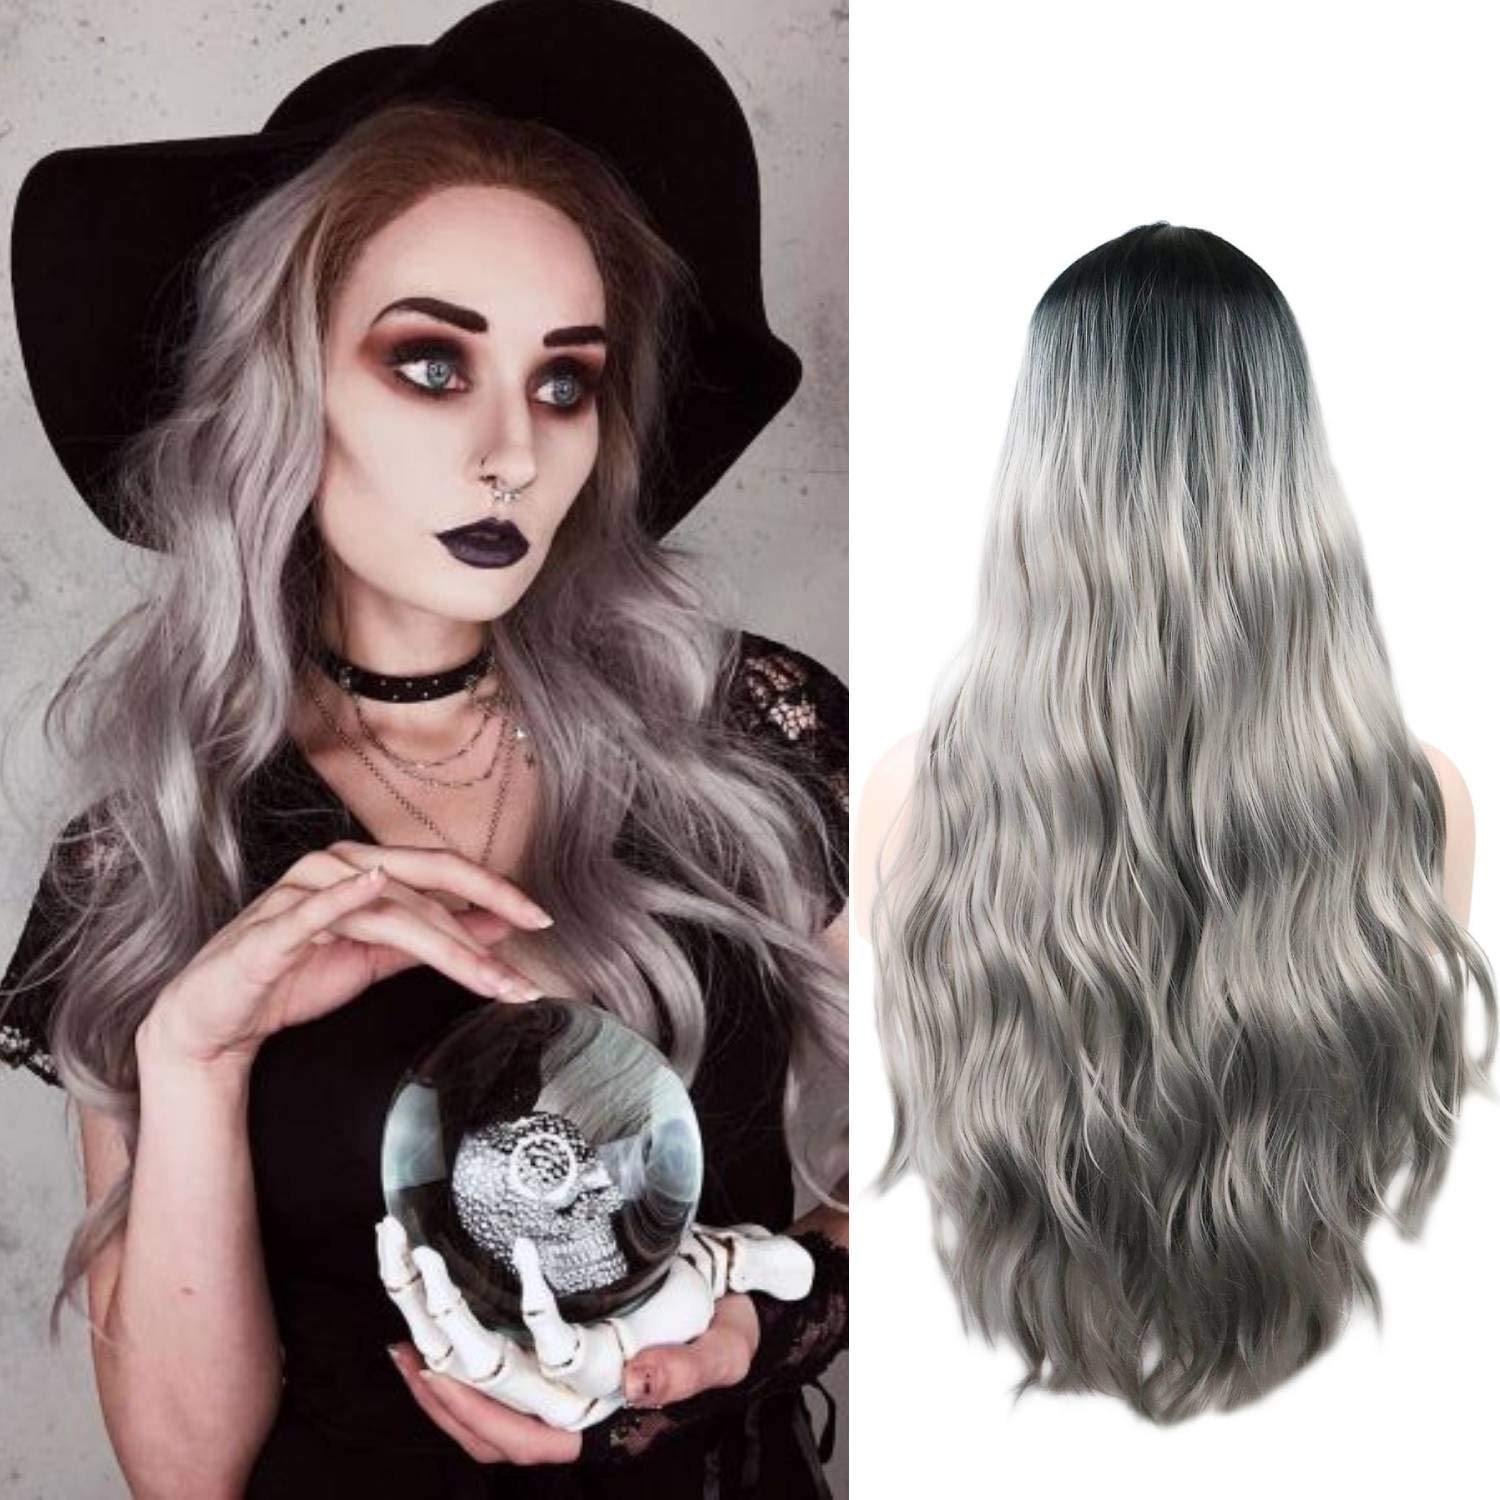 Price:$19.99     TopWigy Long Curly Silver Grey Wig 28 Inches Long Gray Wig for Women Synthetic Heat Resistant Middle Part Ombre silver Wig Dark Roots Long Wavy Wigs Cosplay Party Wig   Beauty